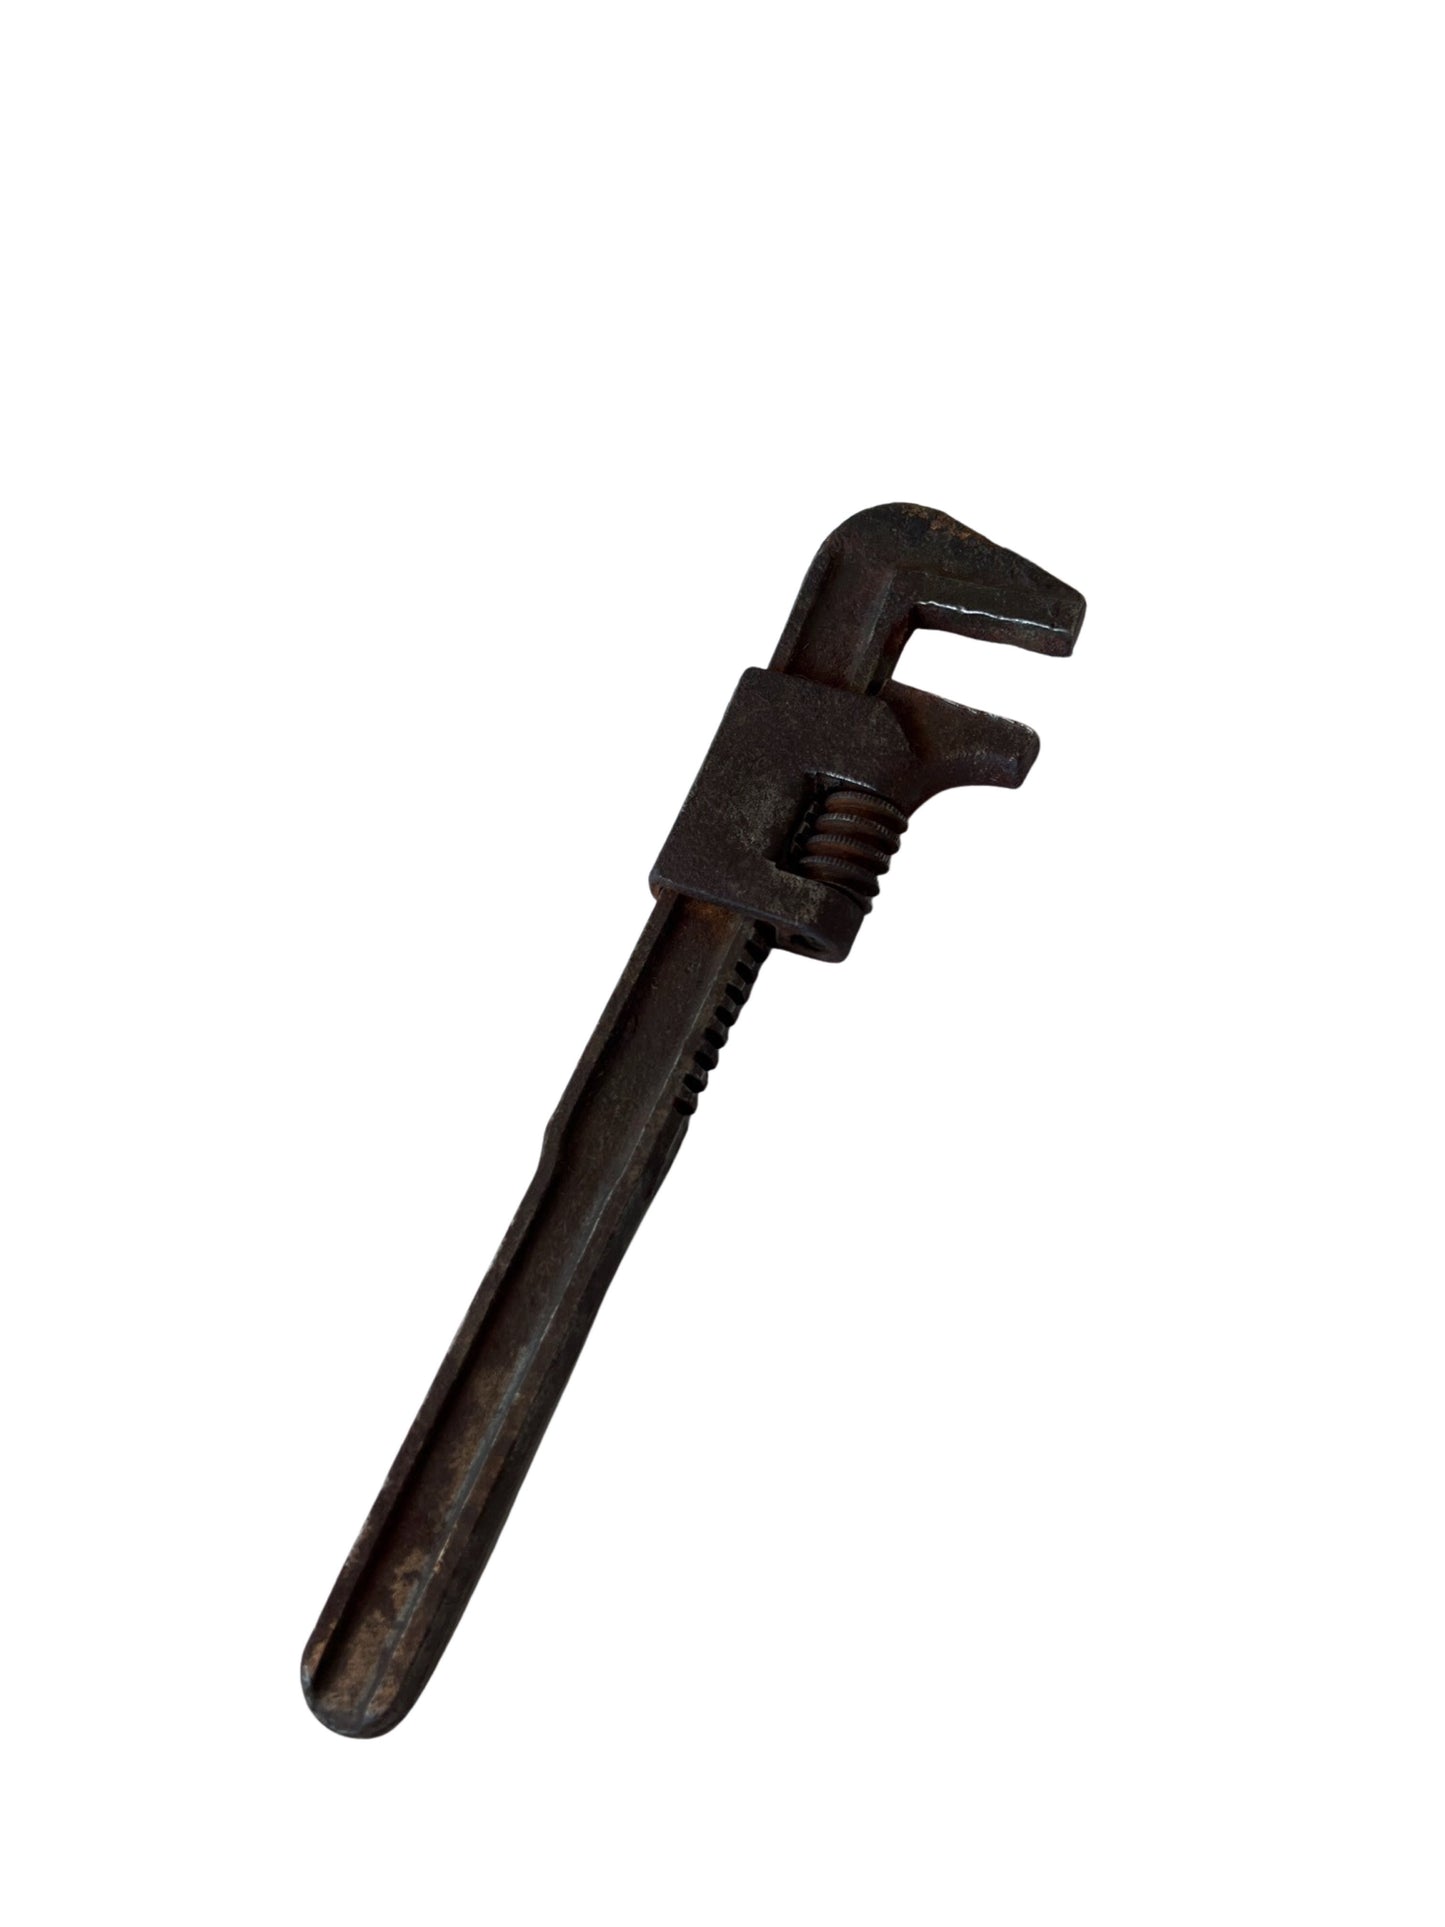 Antique wrench